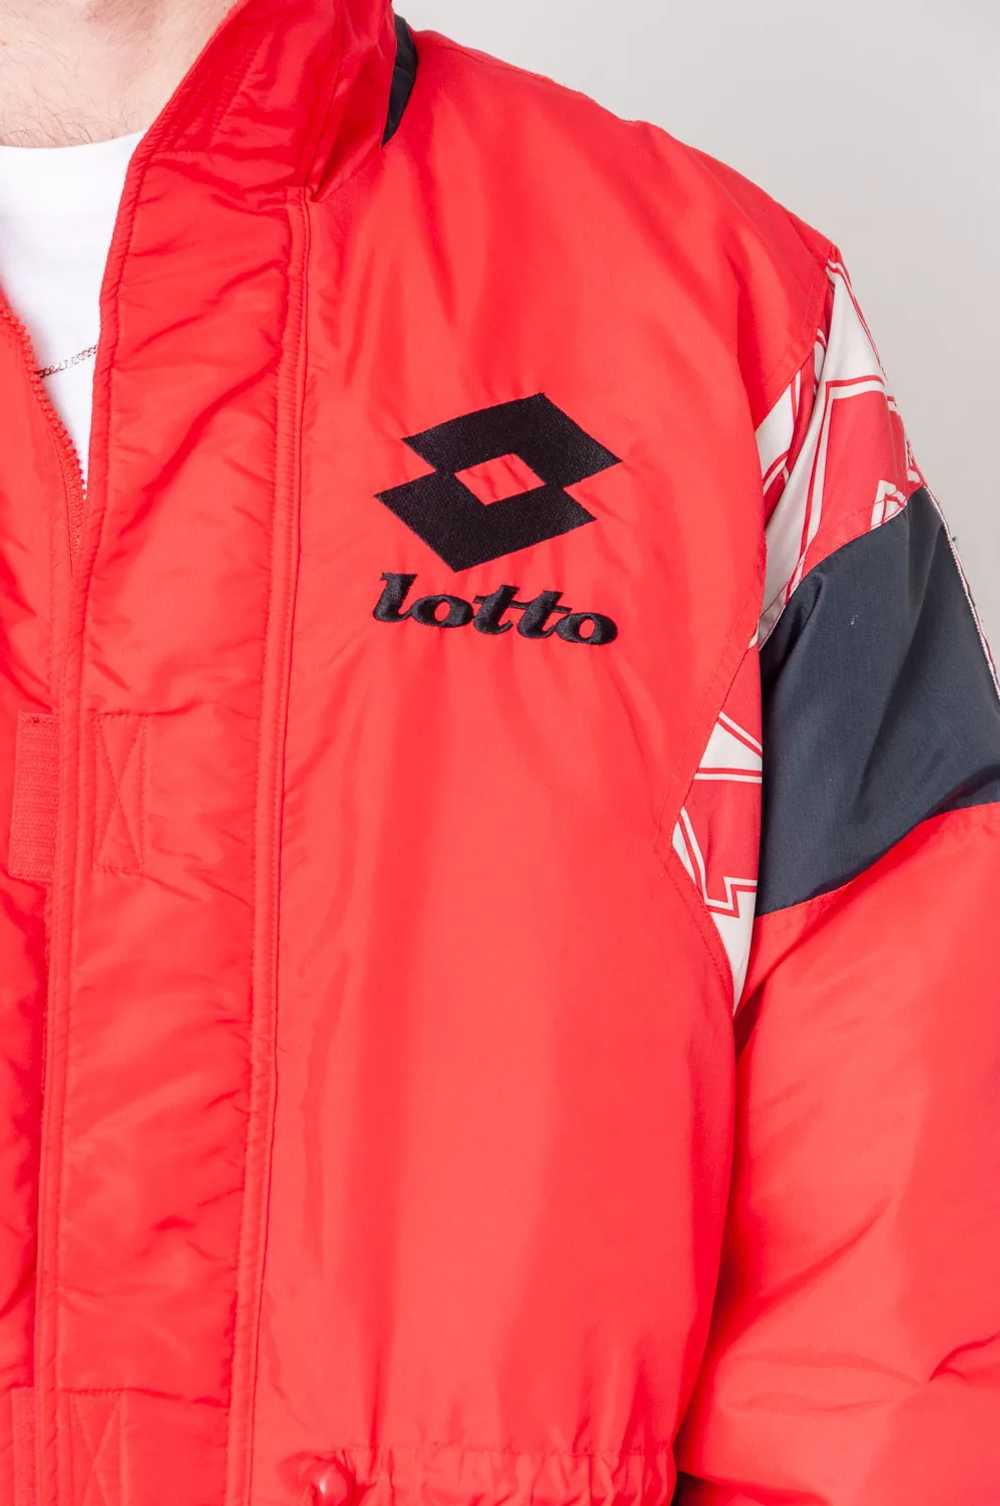 Lotto buffer coat Red with embroidered logo - image 5